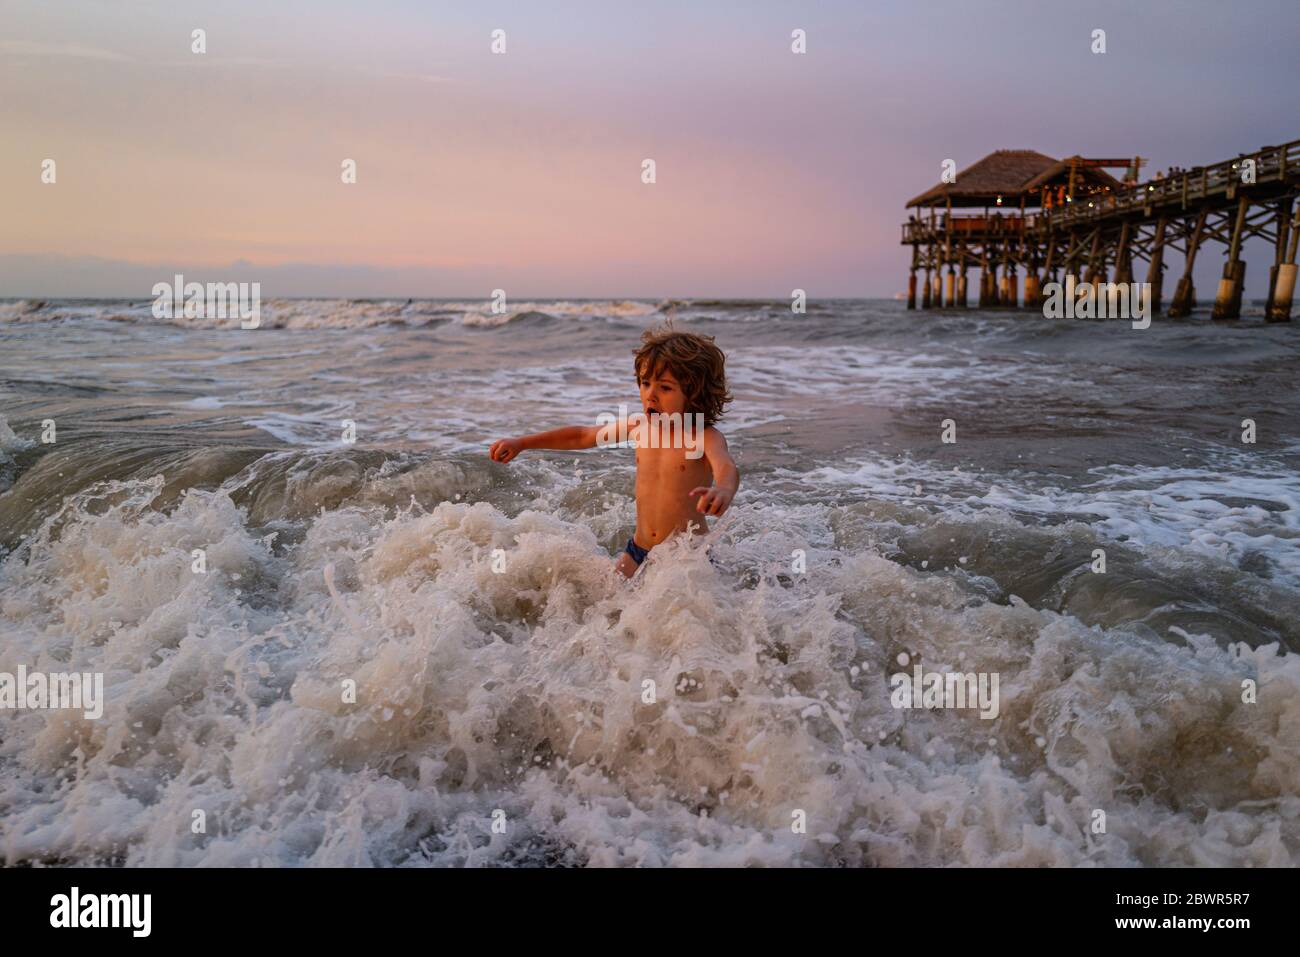 Kid jumping near the waves. Happy kid have fun in sea on beach. Travel lifestyle, swimming activities summer camp. Stock Photo